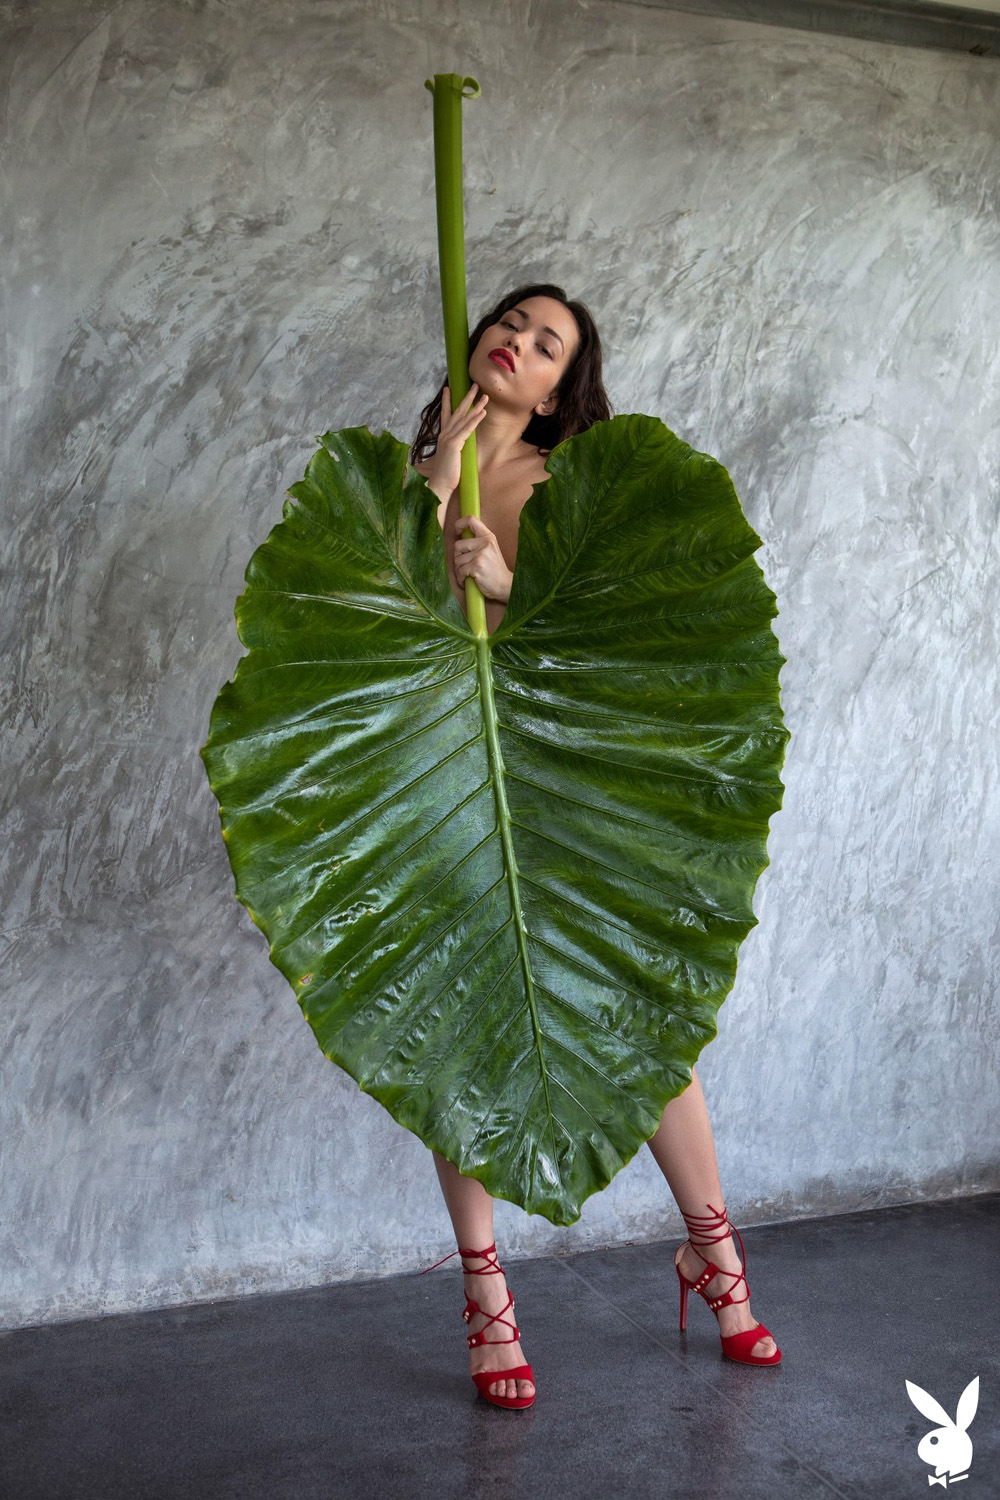 Exotic Beauty Strips From Behind A Giant Tropical Leaf